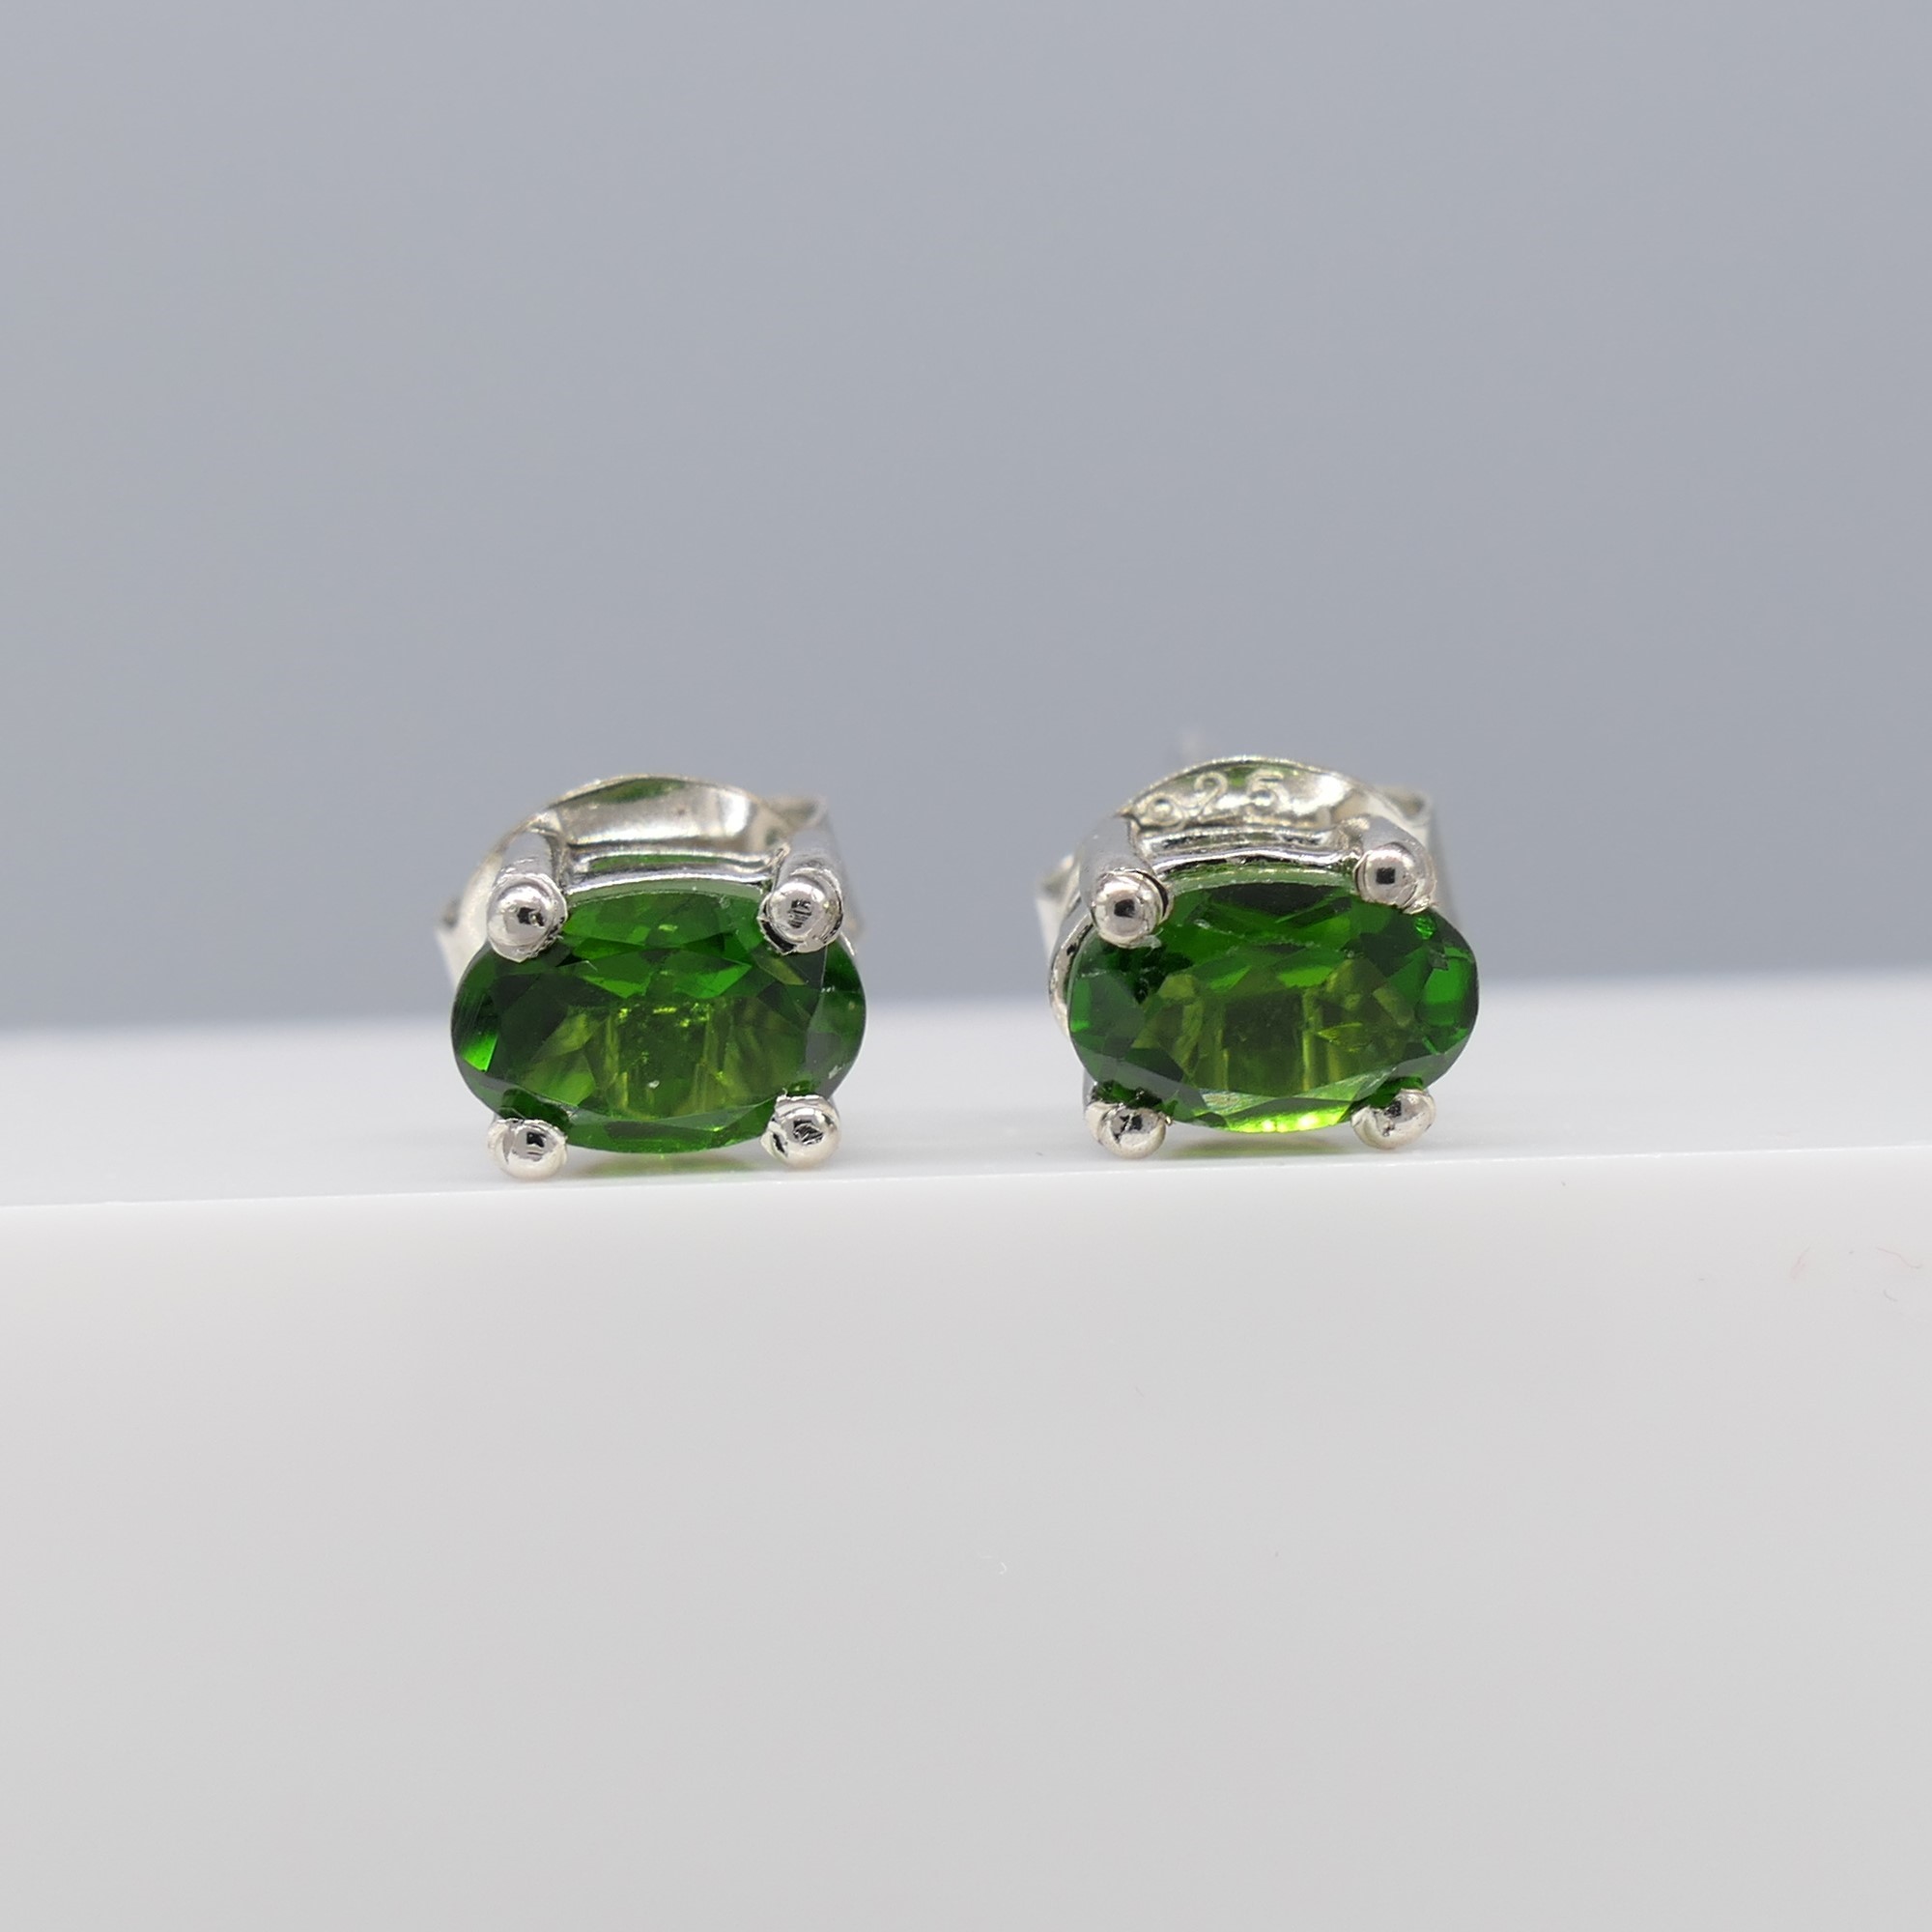 Pair of Natural Chrome Diopside Ear Studs In Sterling Silver - Image 6 of 6